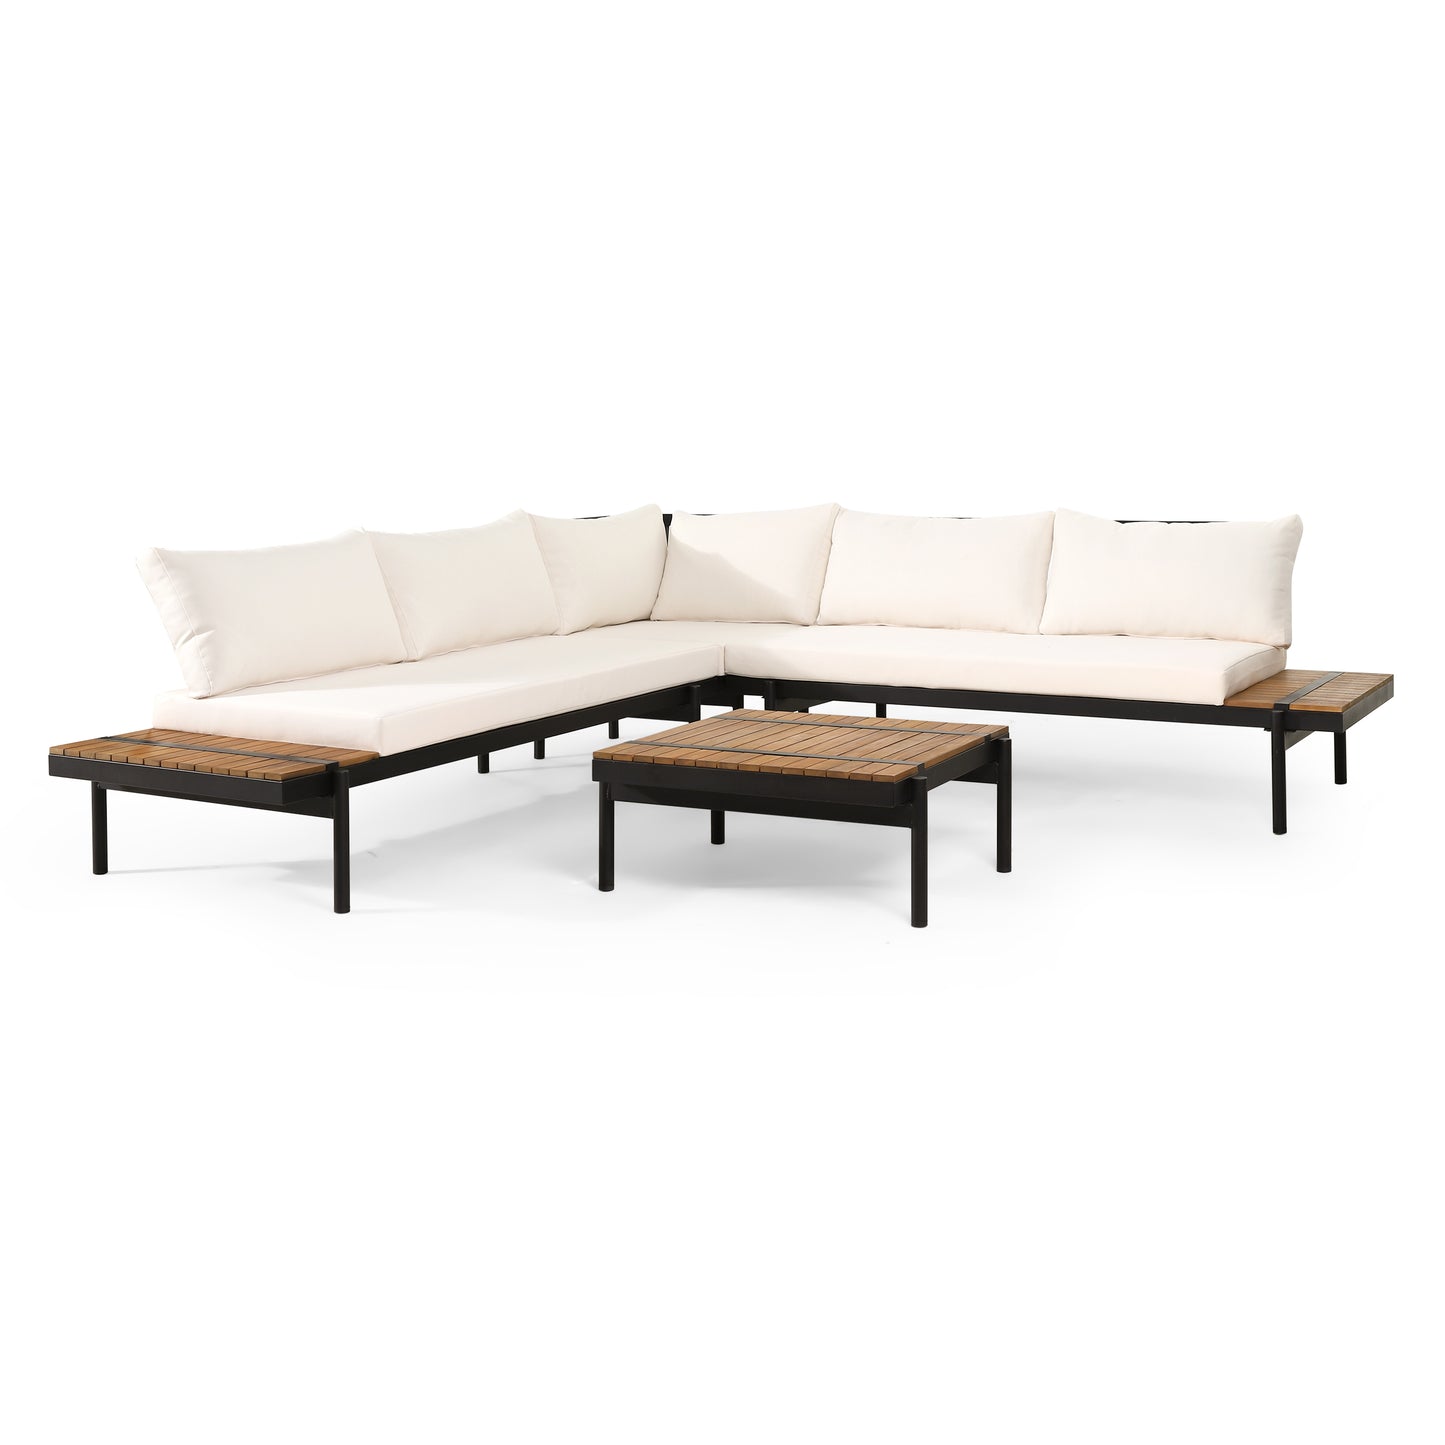 Cody Outdoor Acacia Wood 5 Seater Sectional Sofa Set with Water Resistant Cushions, Teak, Black, and Cream